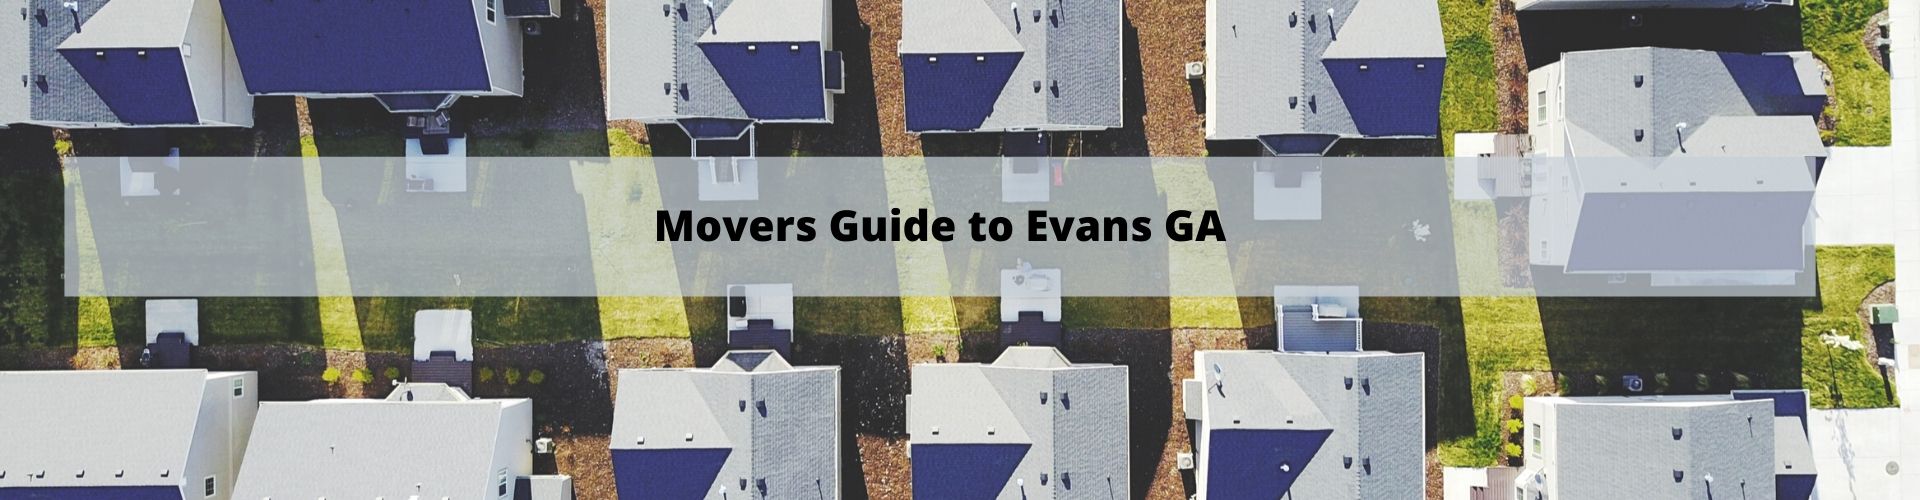 Movers Guide to Evans GA Columbia County